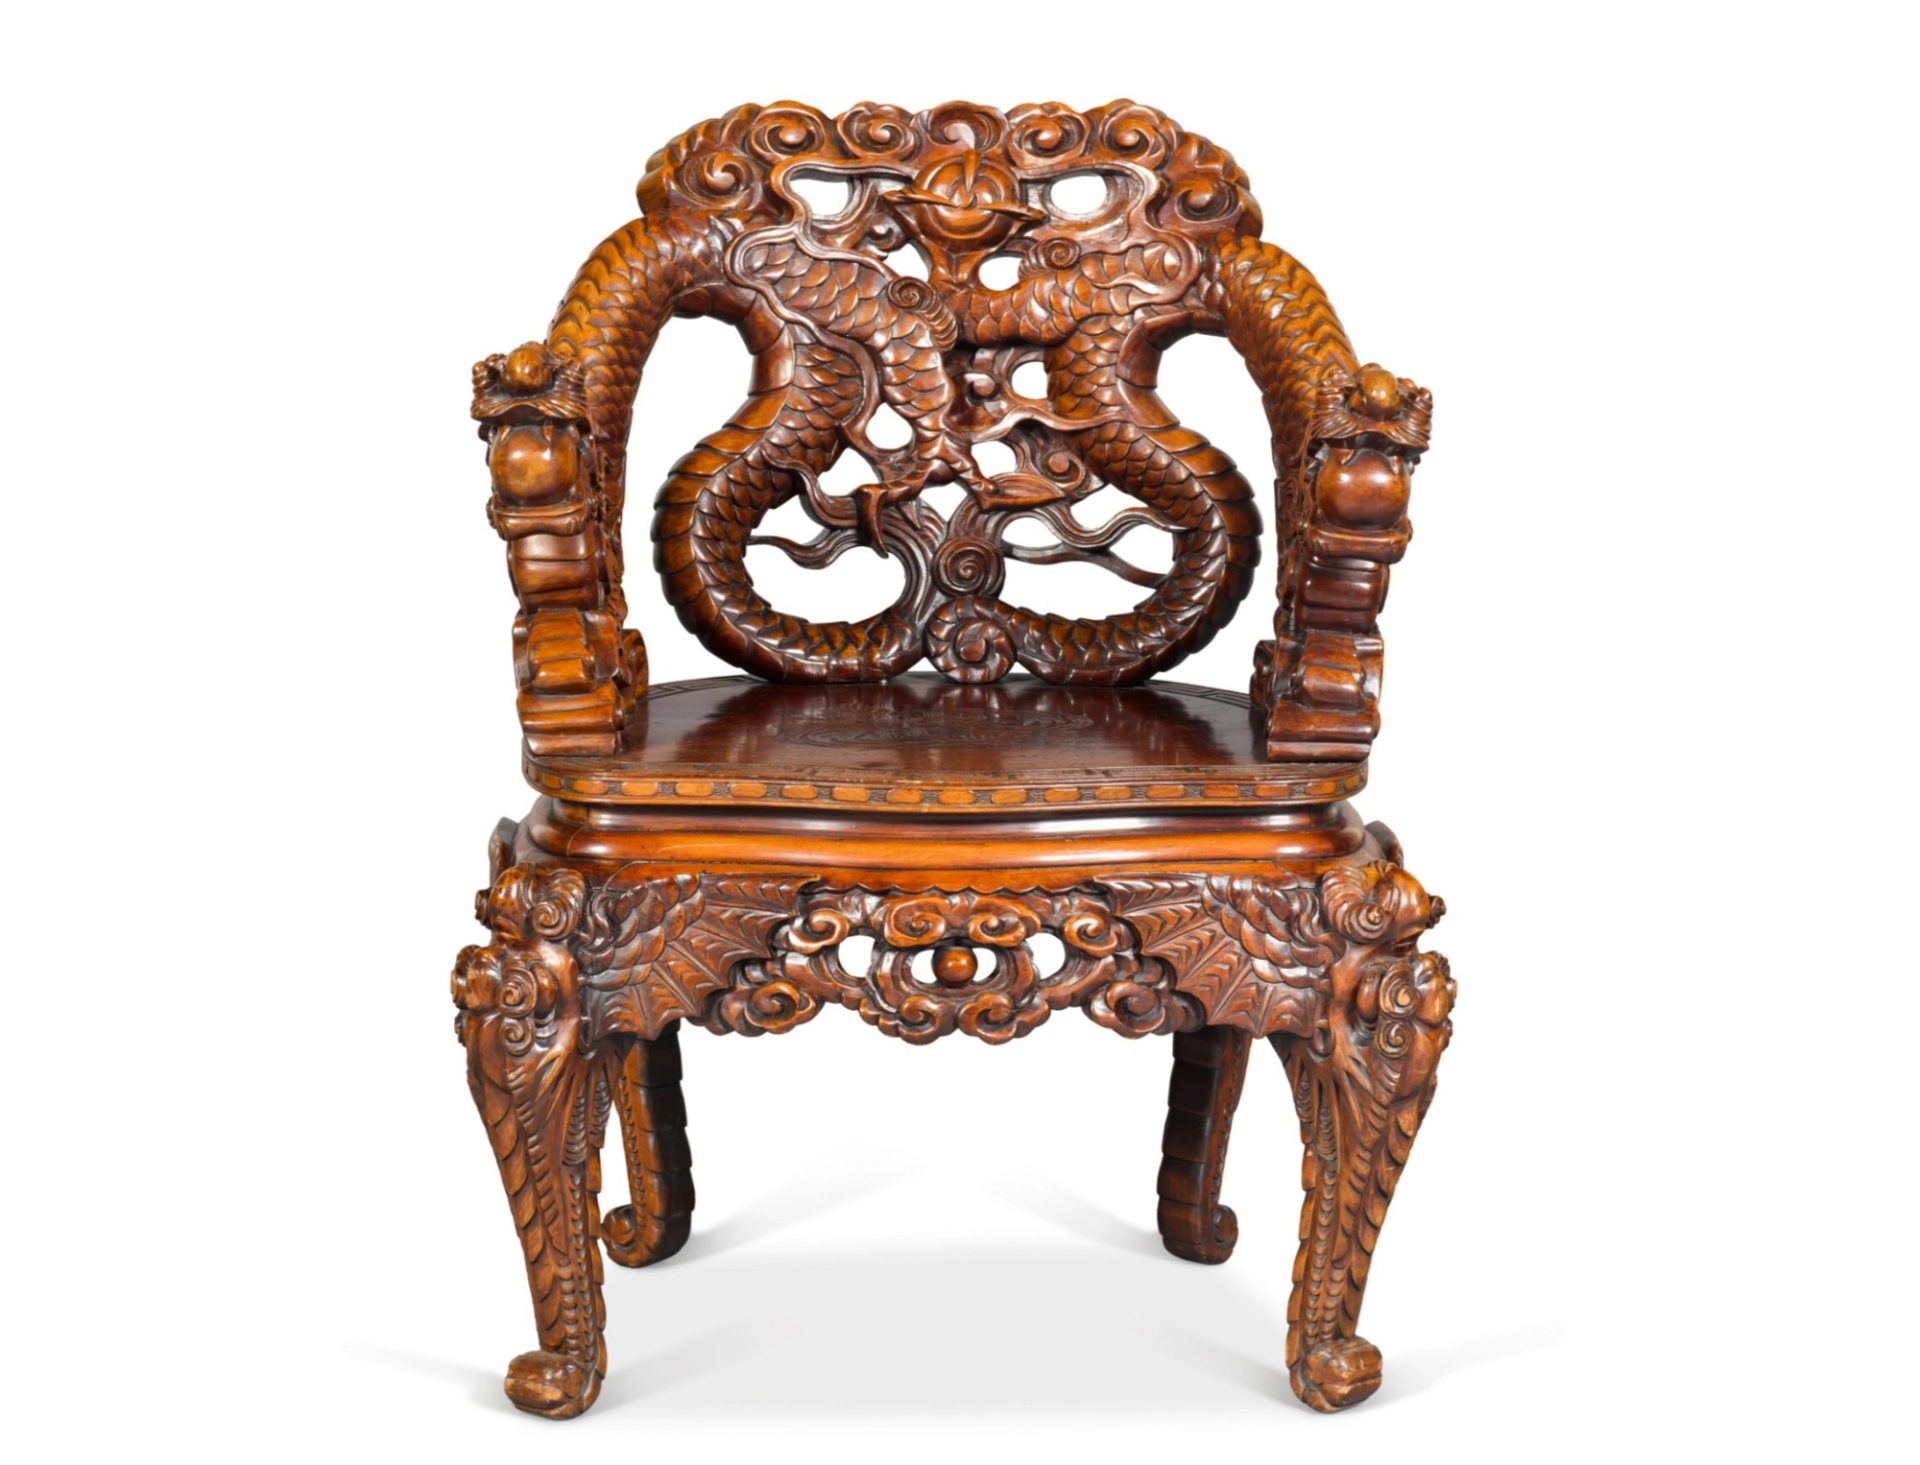 An image of an intricately carved wooden chair, with dragon motifs, owned by Freddie Mercury.